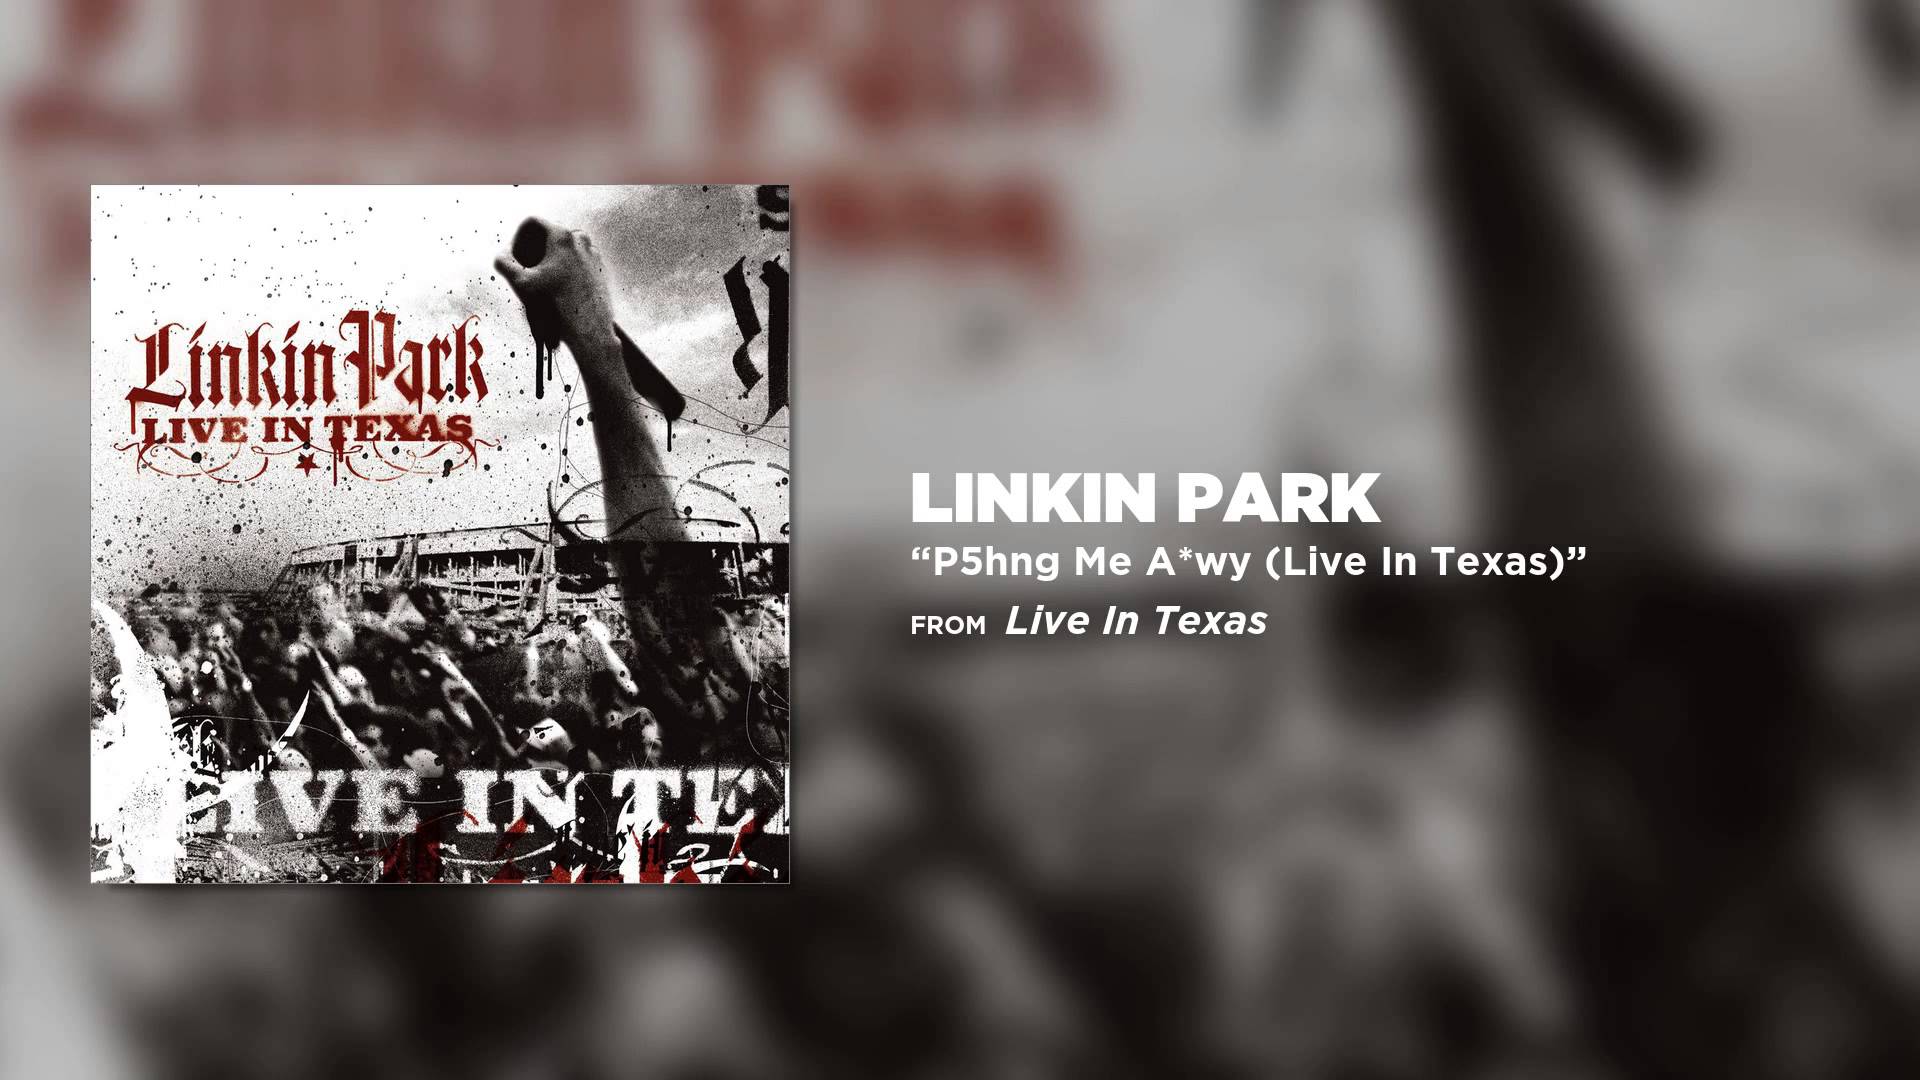 Linkin park one step close. Linkin Park Runaway. Linkin Park Numb (Live in Texas). From the inside Linkin Park обложка. Linkin Park Live in Texas обложка.